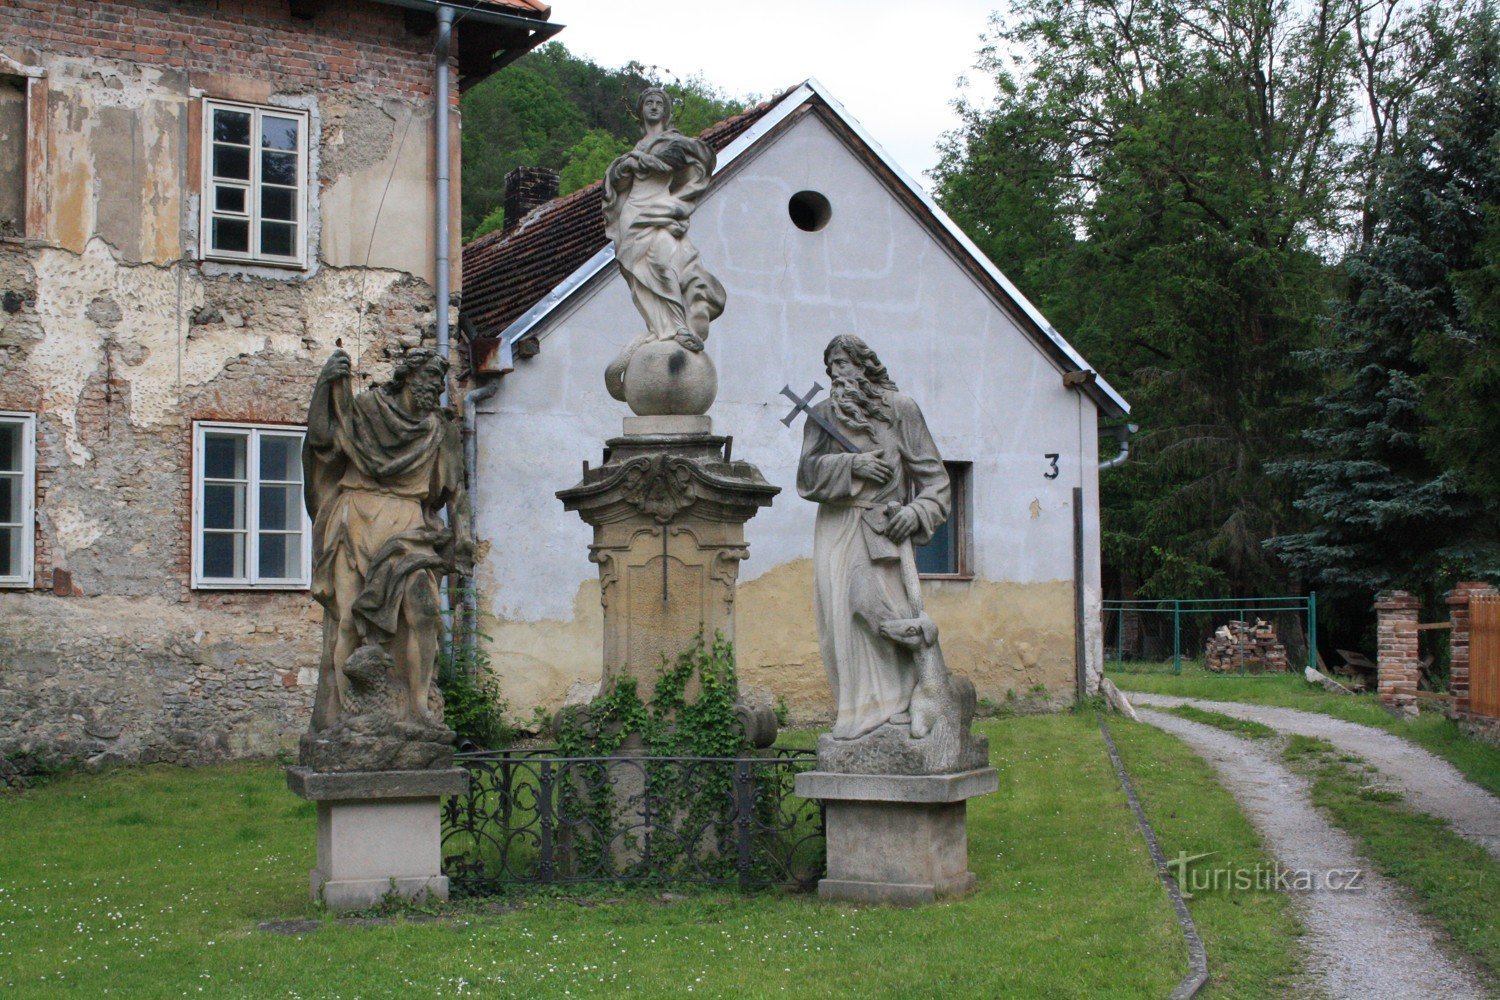 Saint John under the Rock and the statue in the village